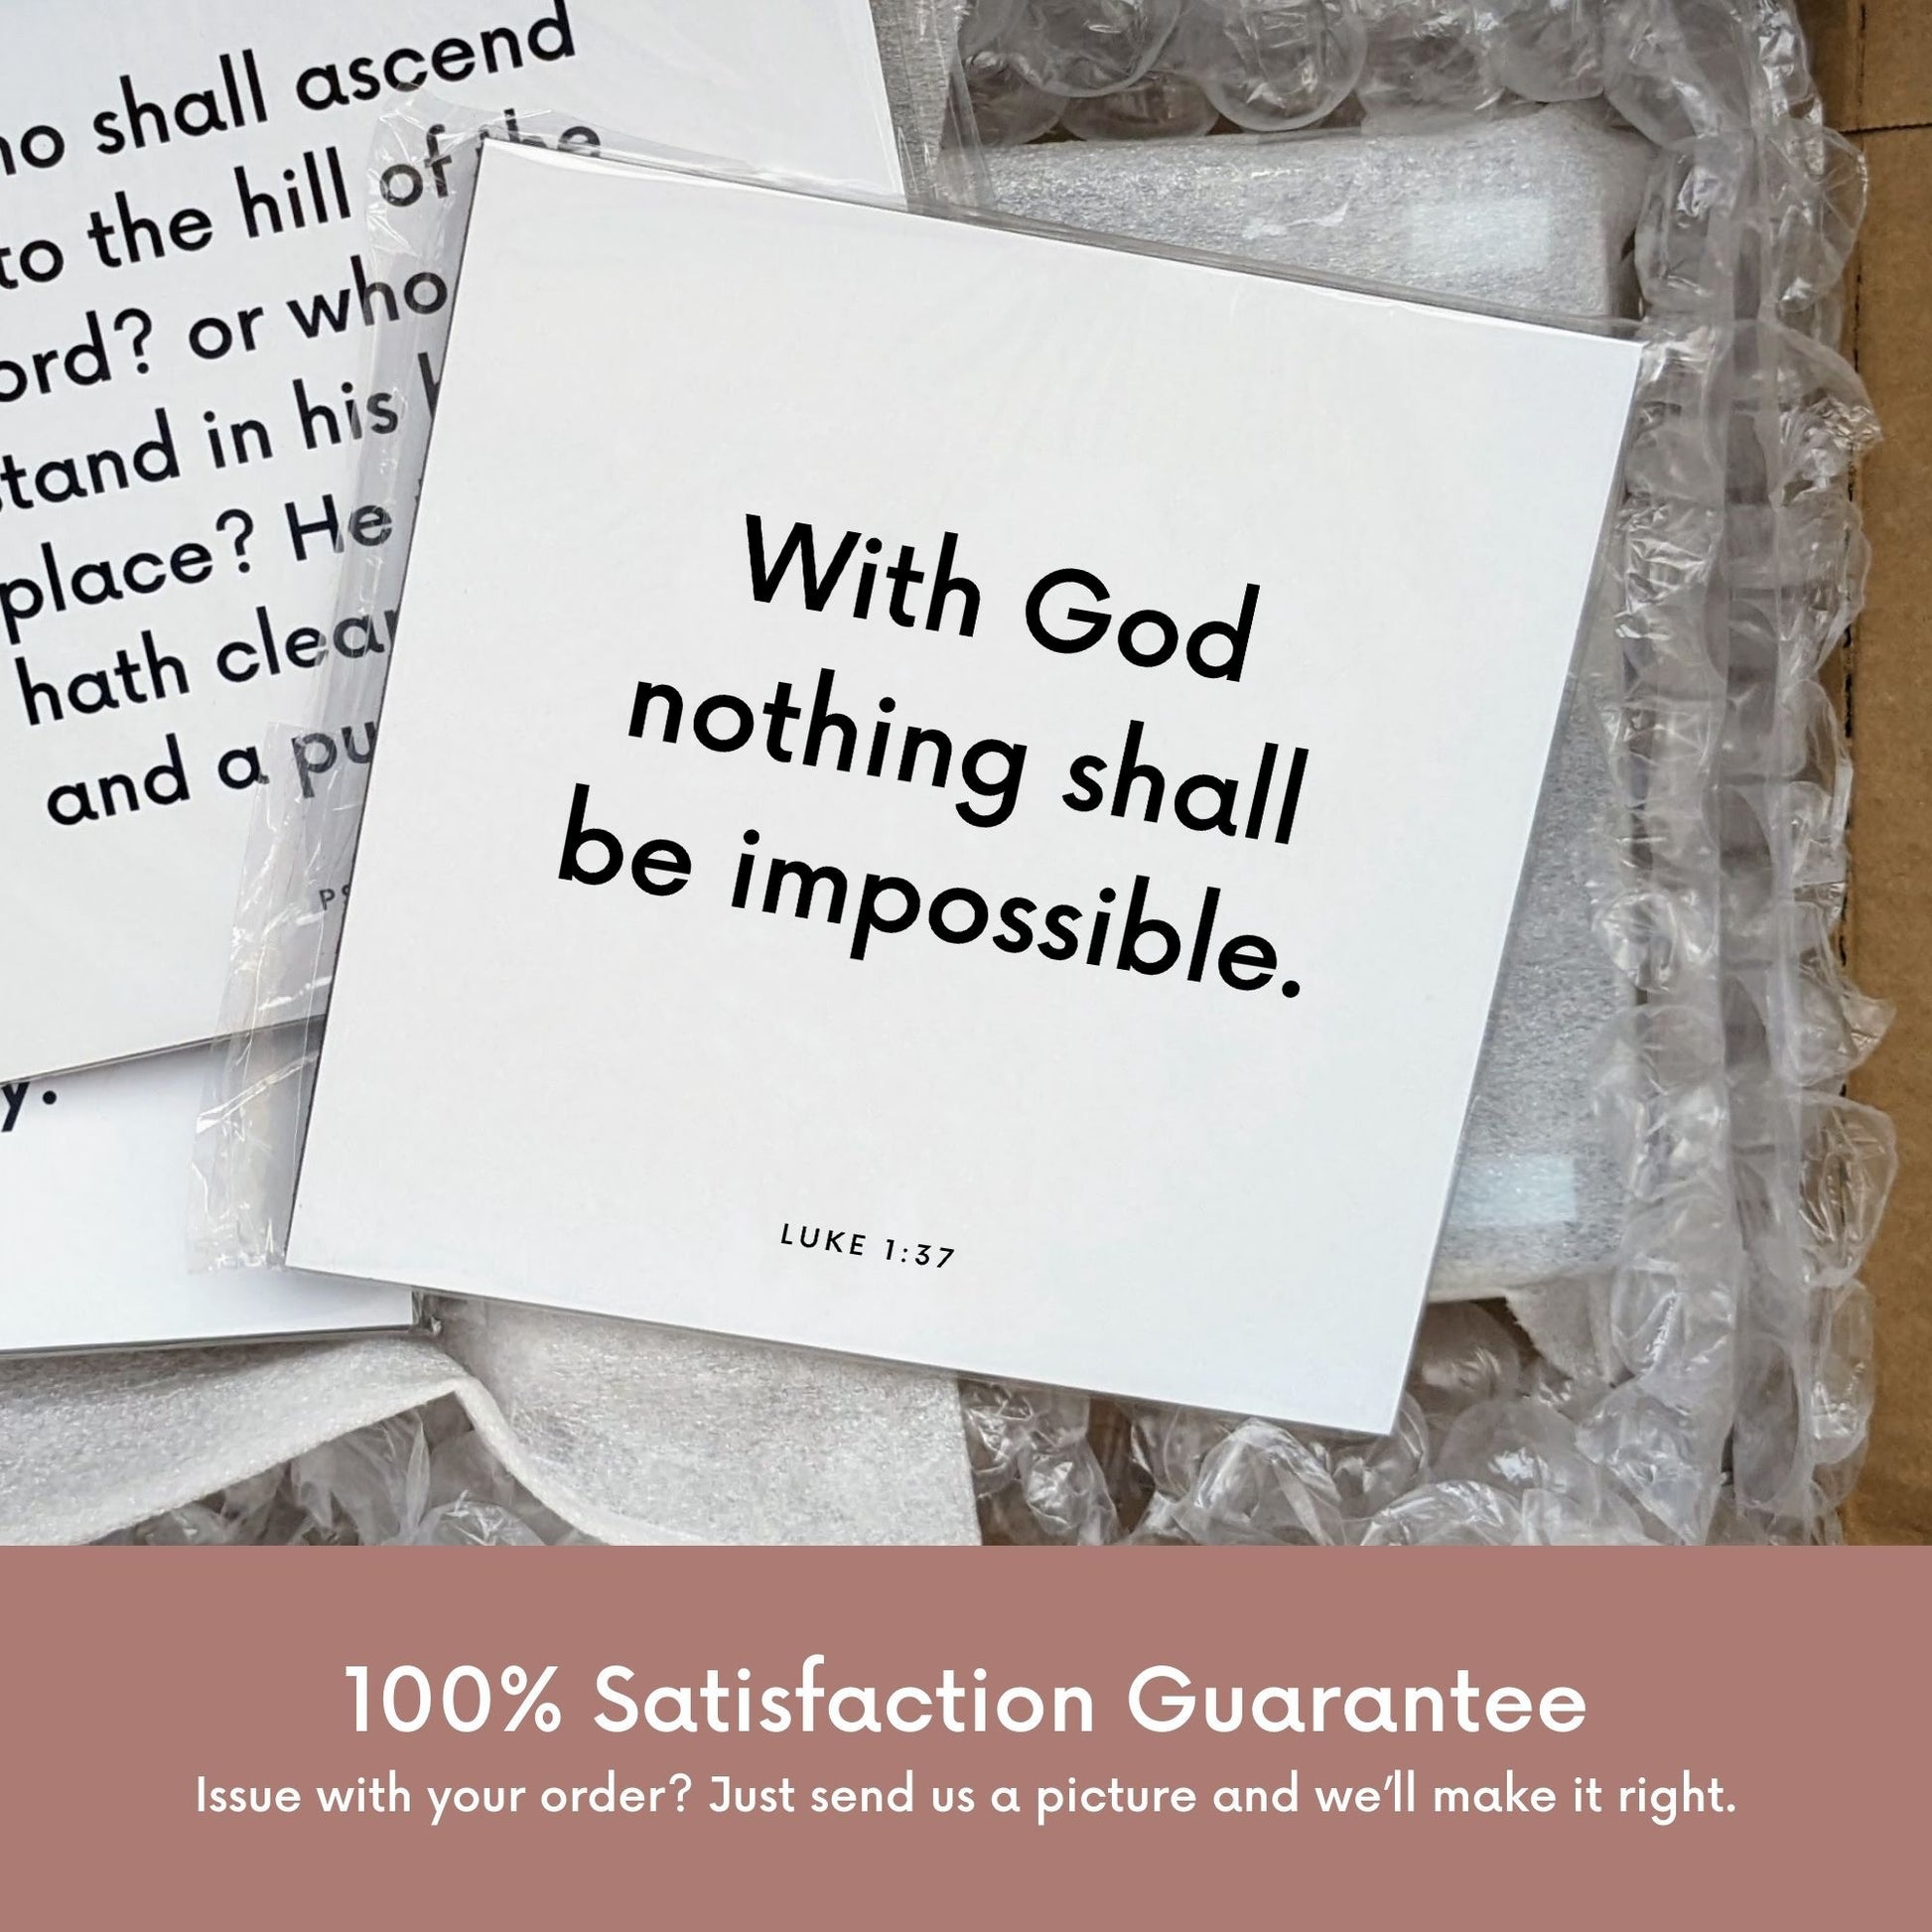 Shipping materials for scripture tile of Luke 1:37 - "With God nothing shall be impossible"